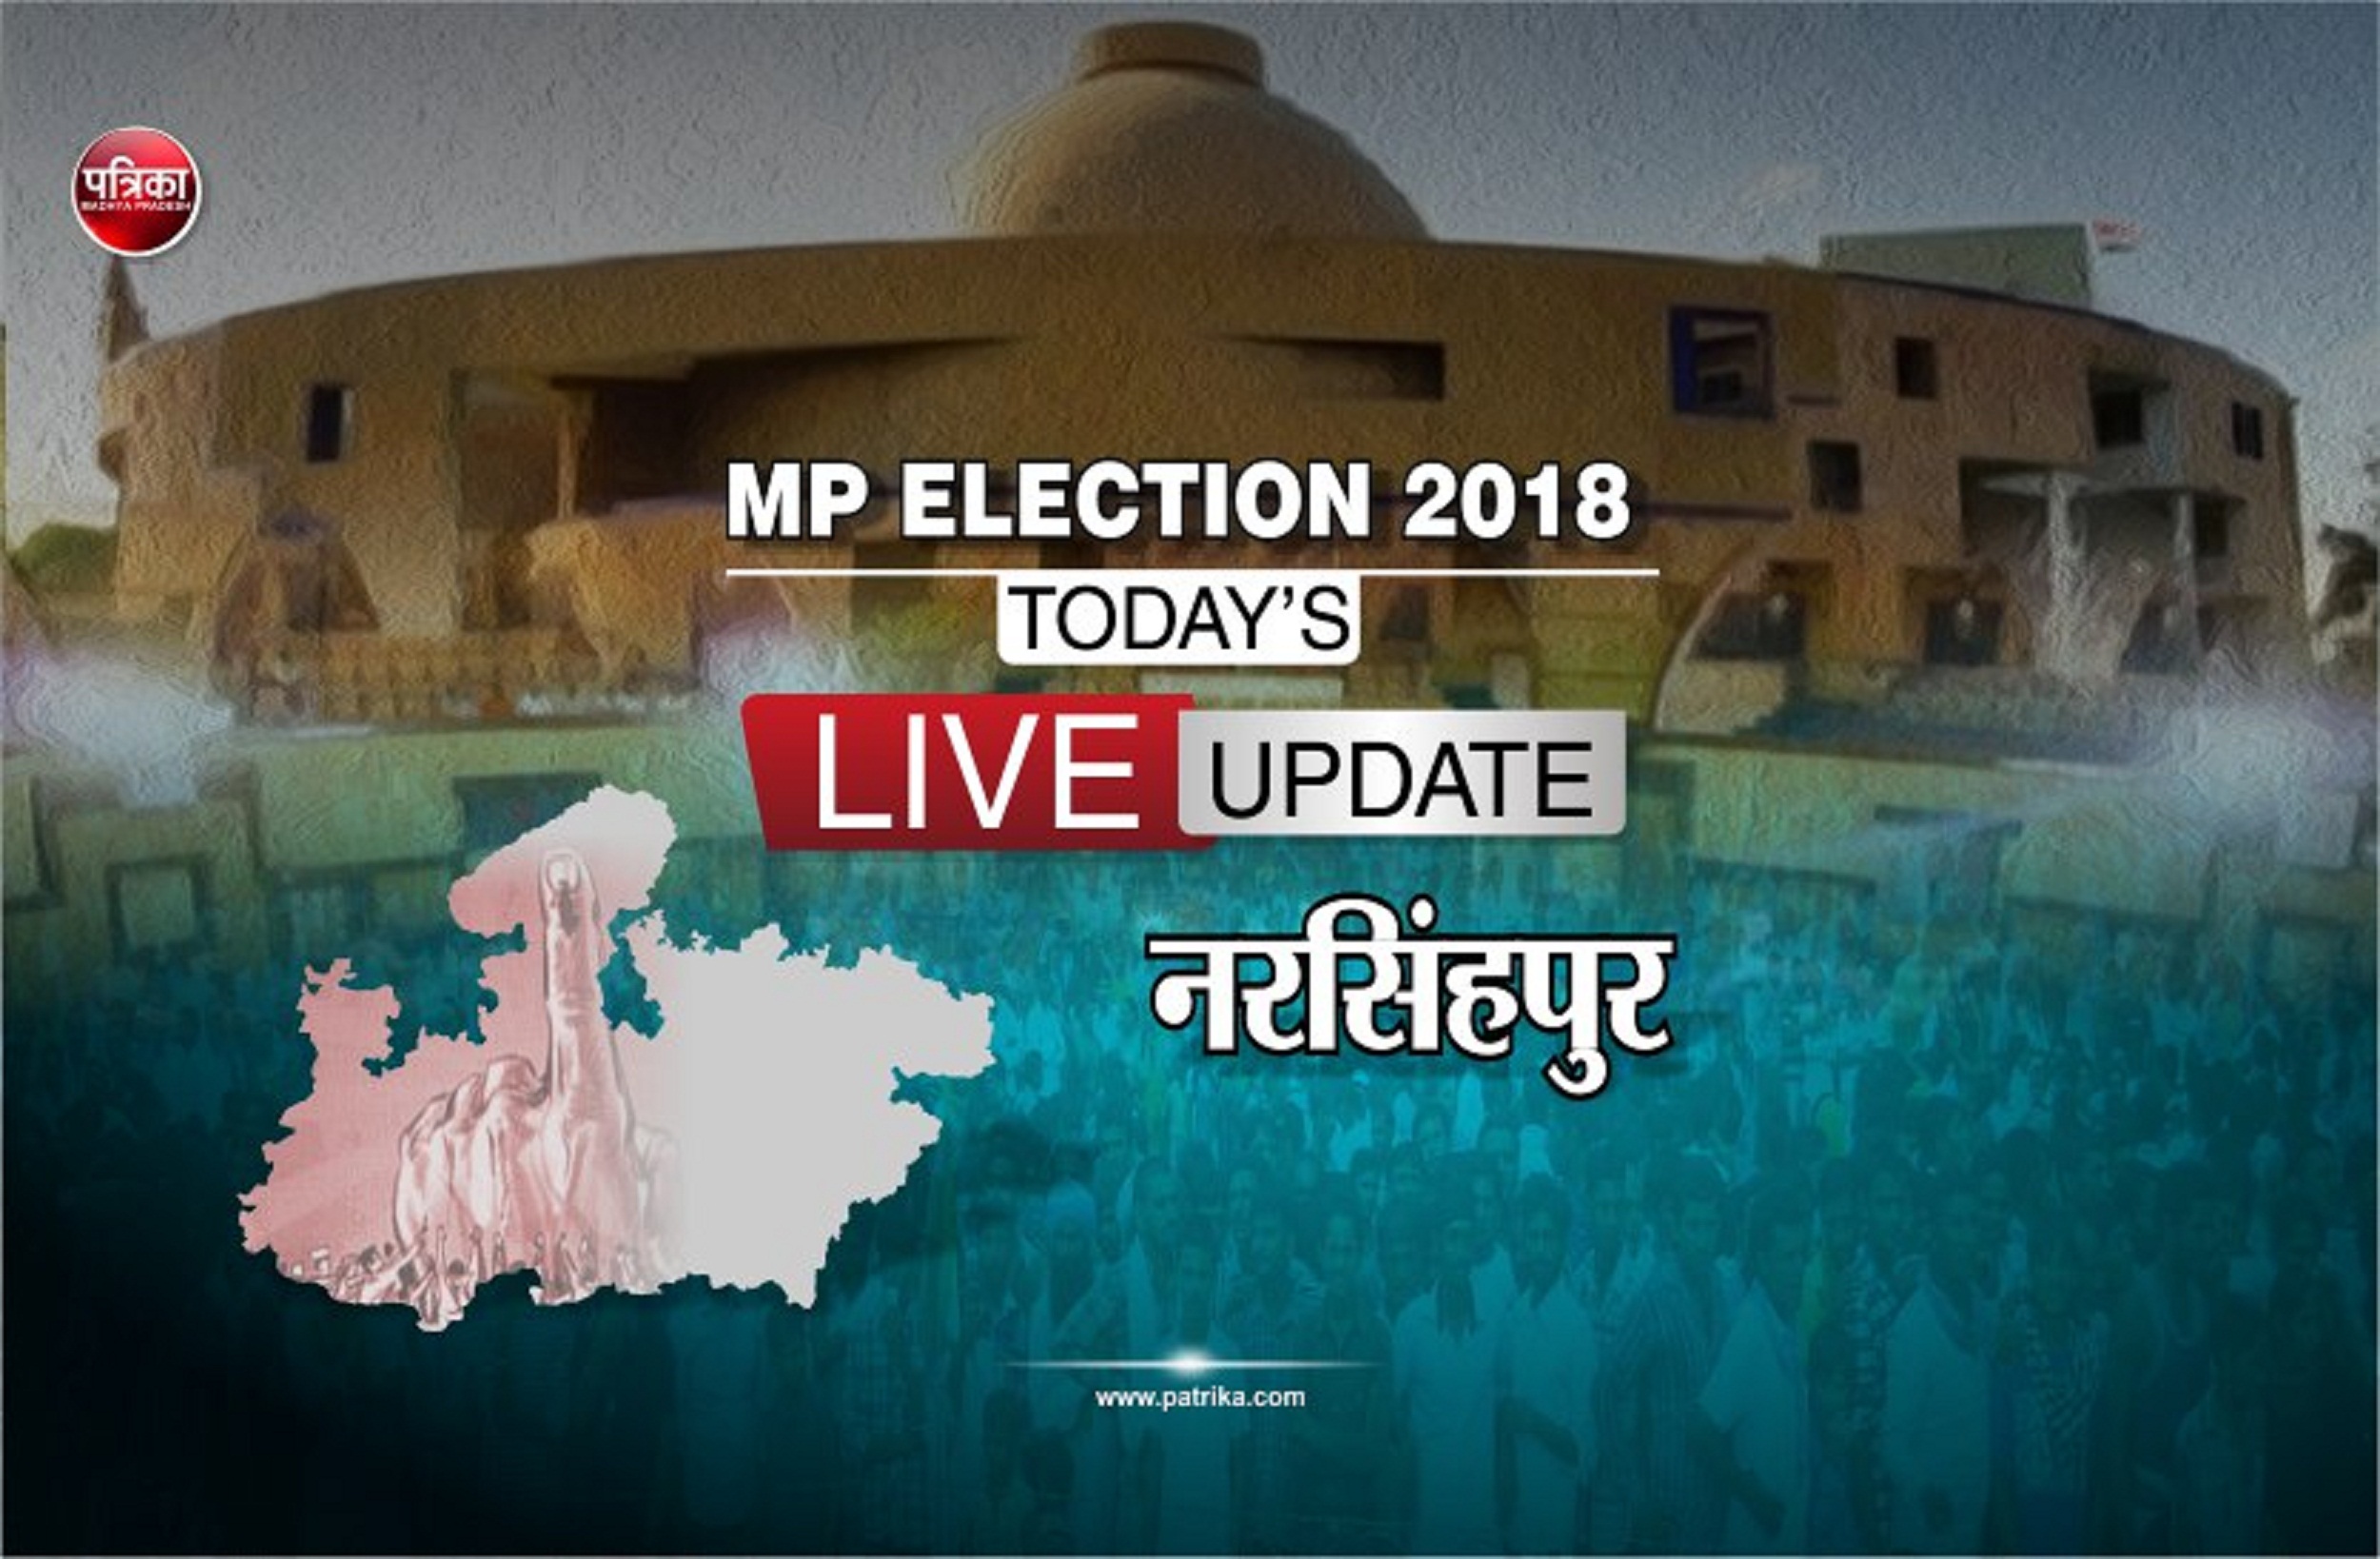 Mp election results 2018 live updates from narsinghpur